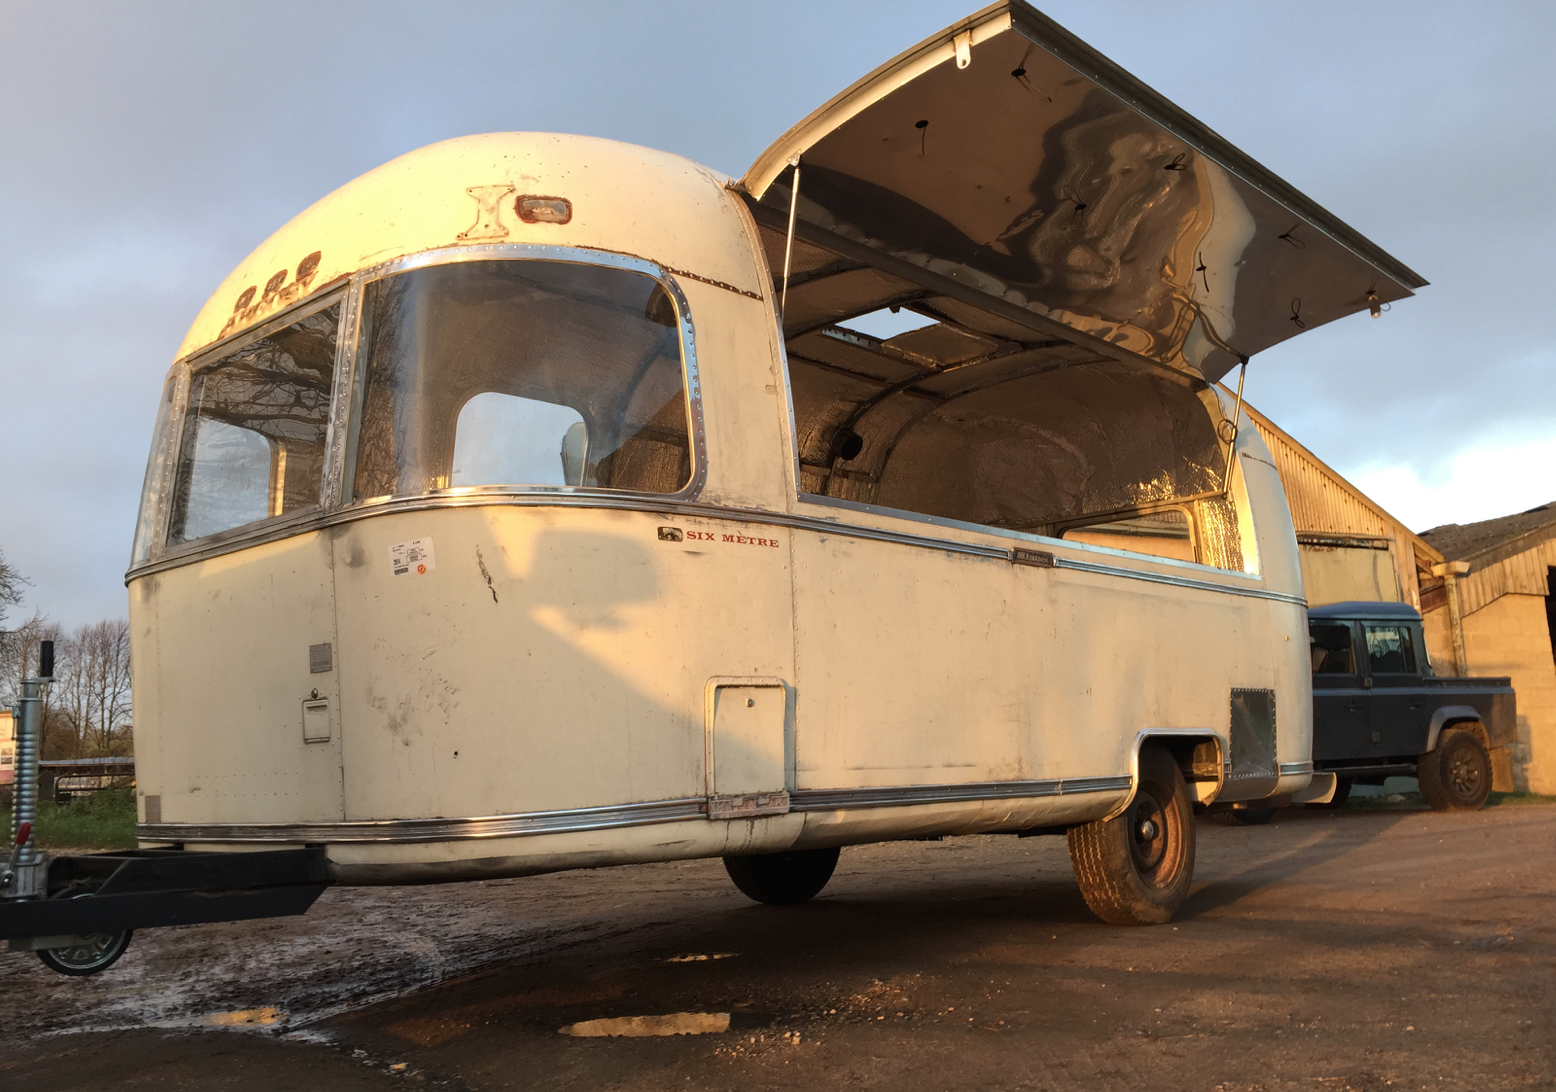 airstream catering trailer for sale - Vintage Airstreams